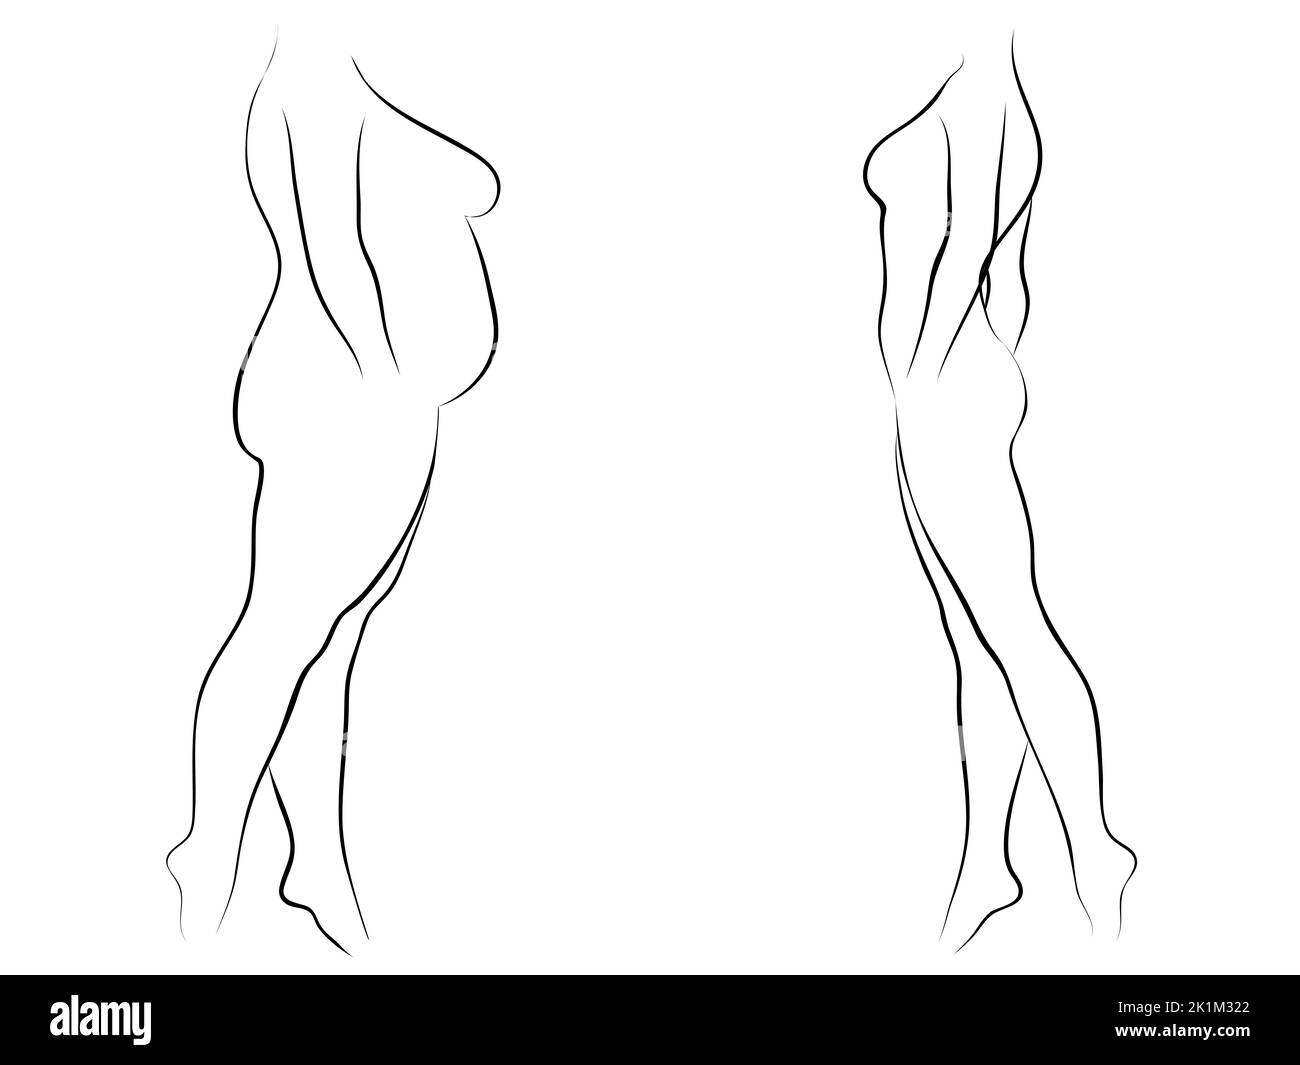 Conceptual fat overweight female vs slim fit healthy body after weight loss or diet with muscles thin young woman. 3D illustration for fitness Stock Photo